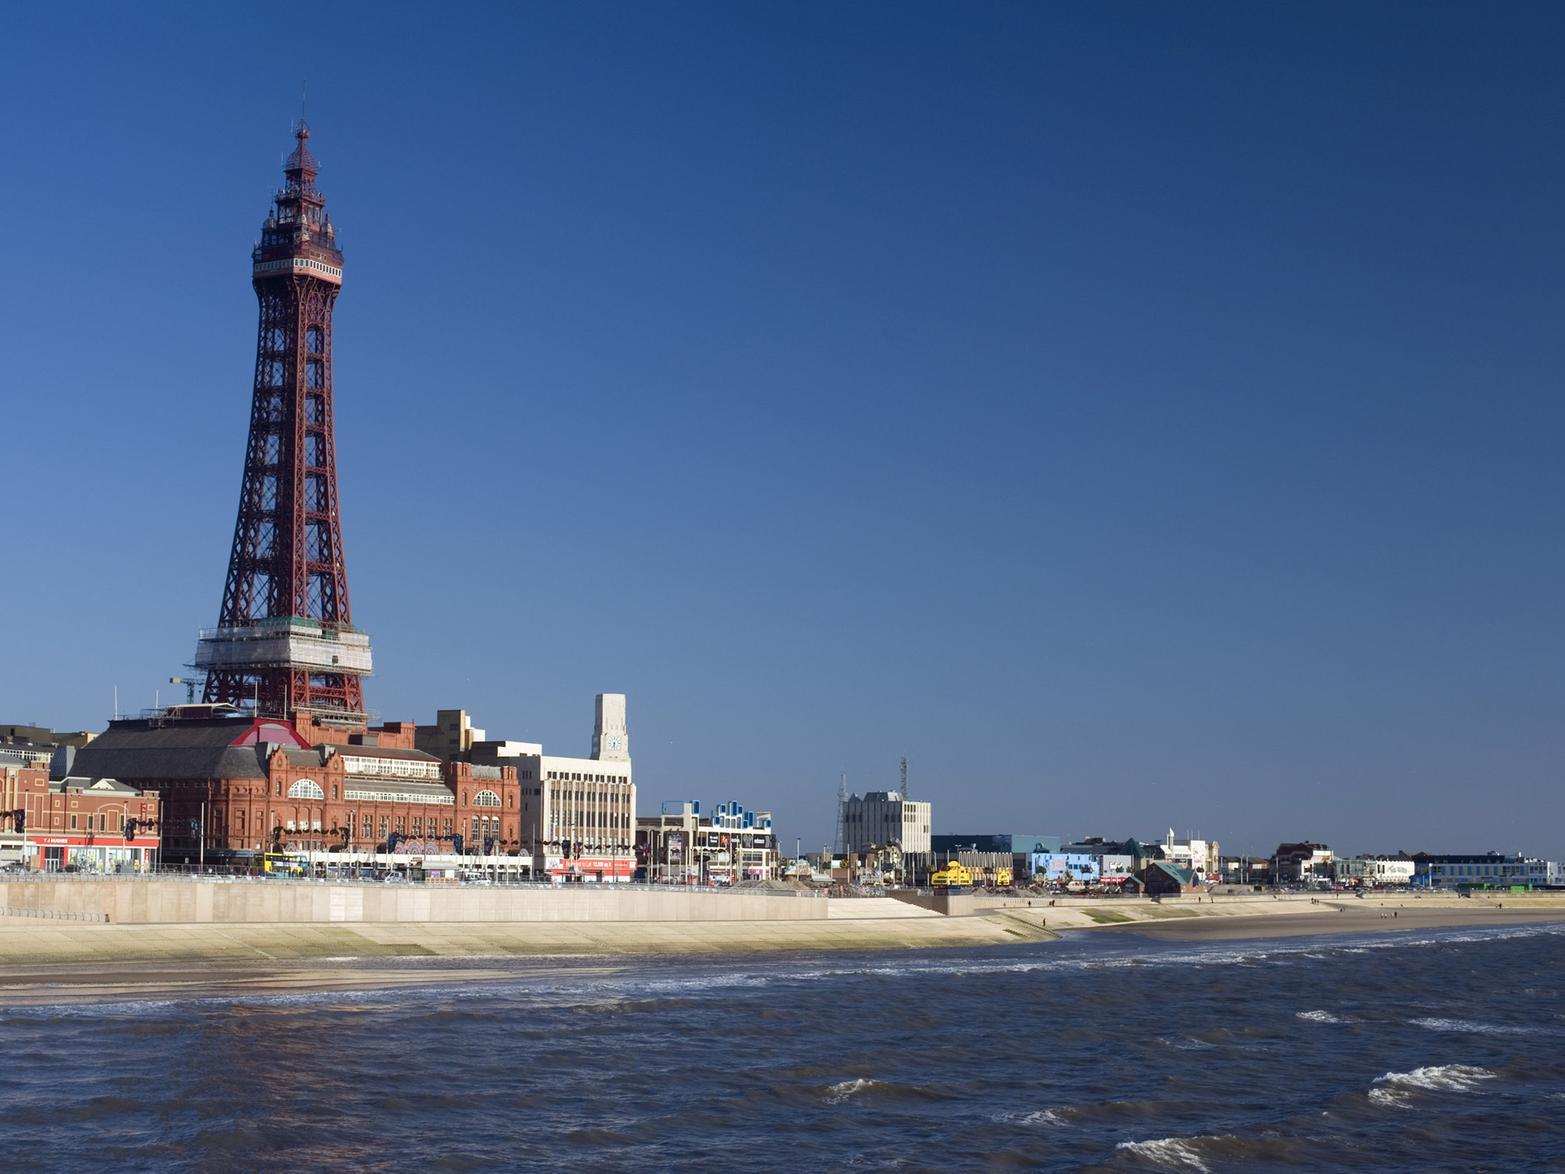 These are the 15 gigs, shows, events and festivals that you won't want to miss in Blackpool this Spring. Photo: photoeverywhere.co.uk